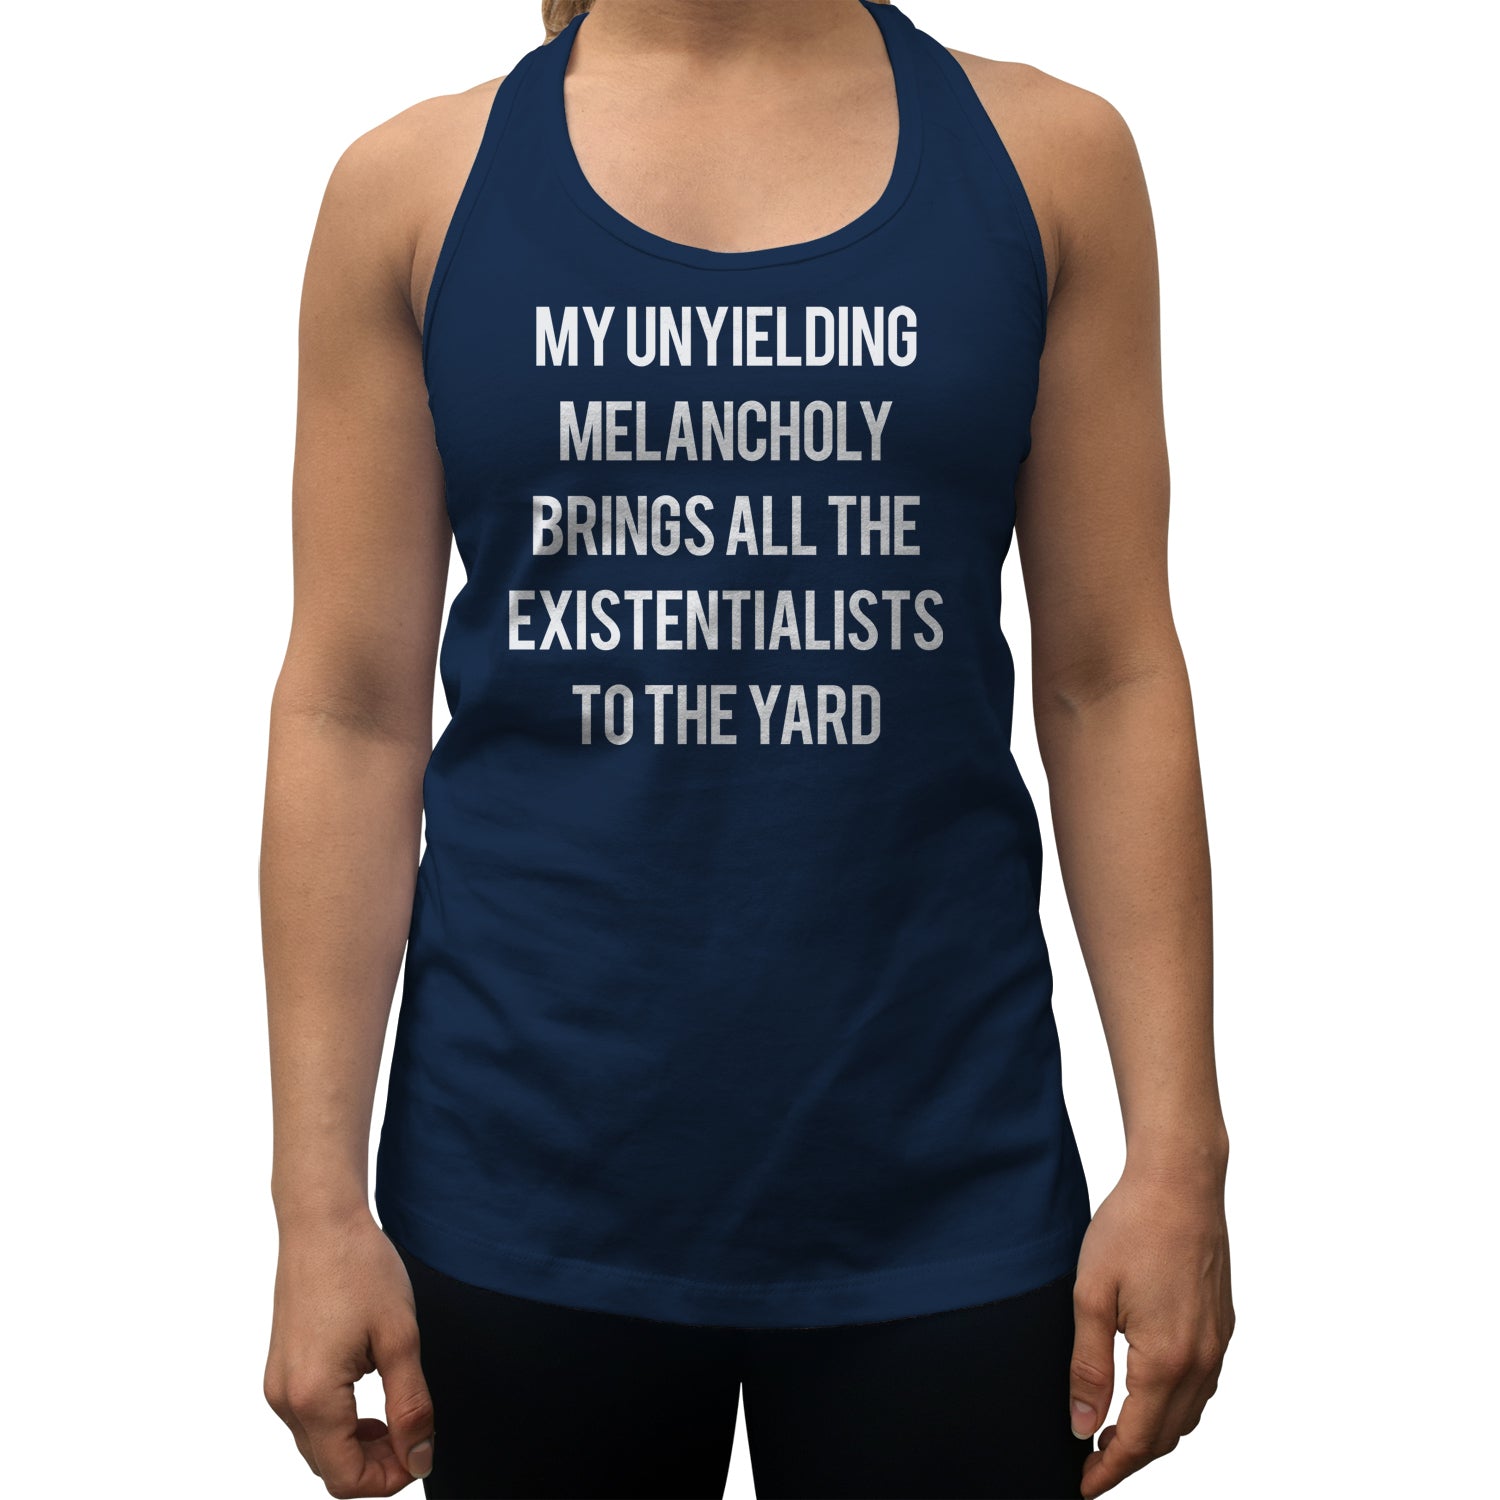 Women's My Unyielding Melancholy Brings All The Existentialists To The Yard Racerback Tank Top